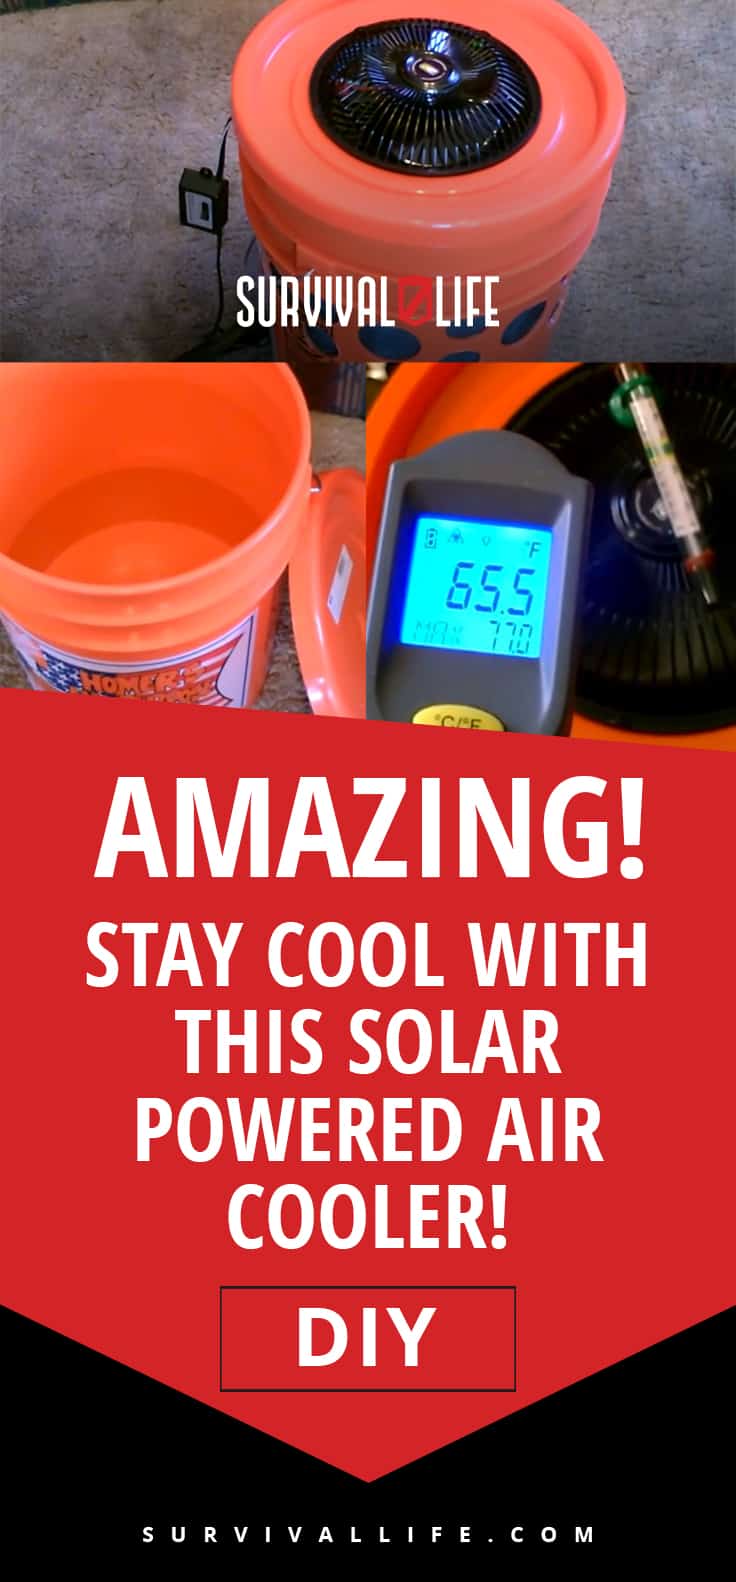 Solar Powered Air Cooler | Amazing! Stay Cool With This Solar Powered Air Cooler! [DIY]